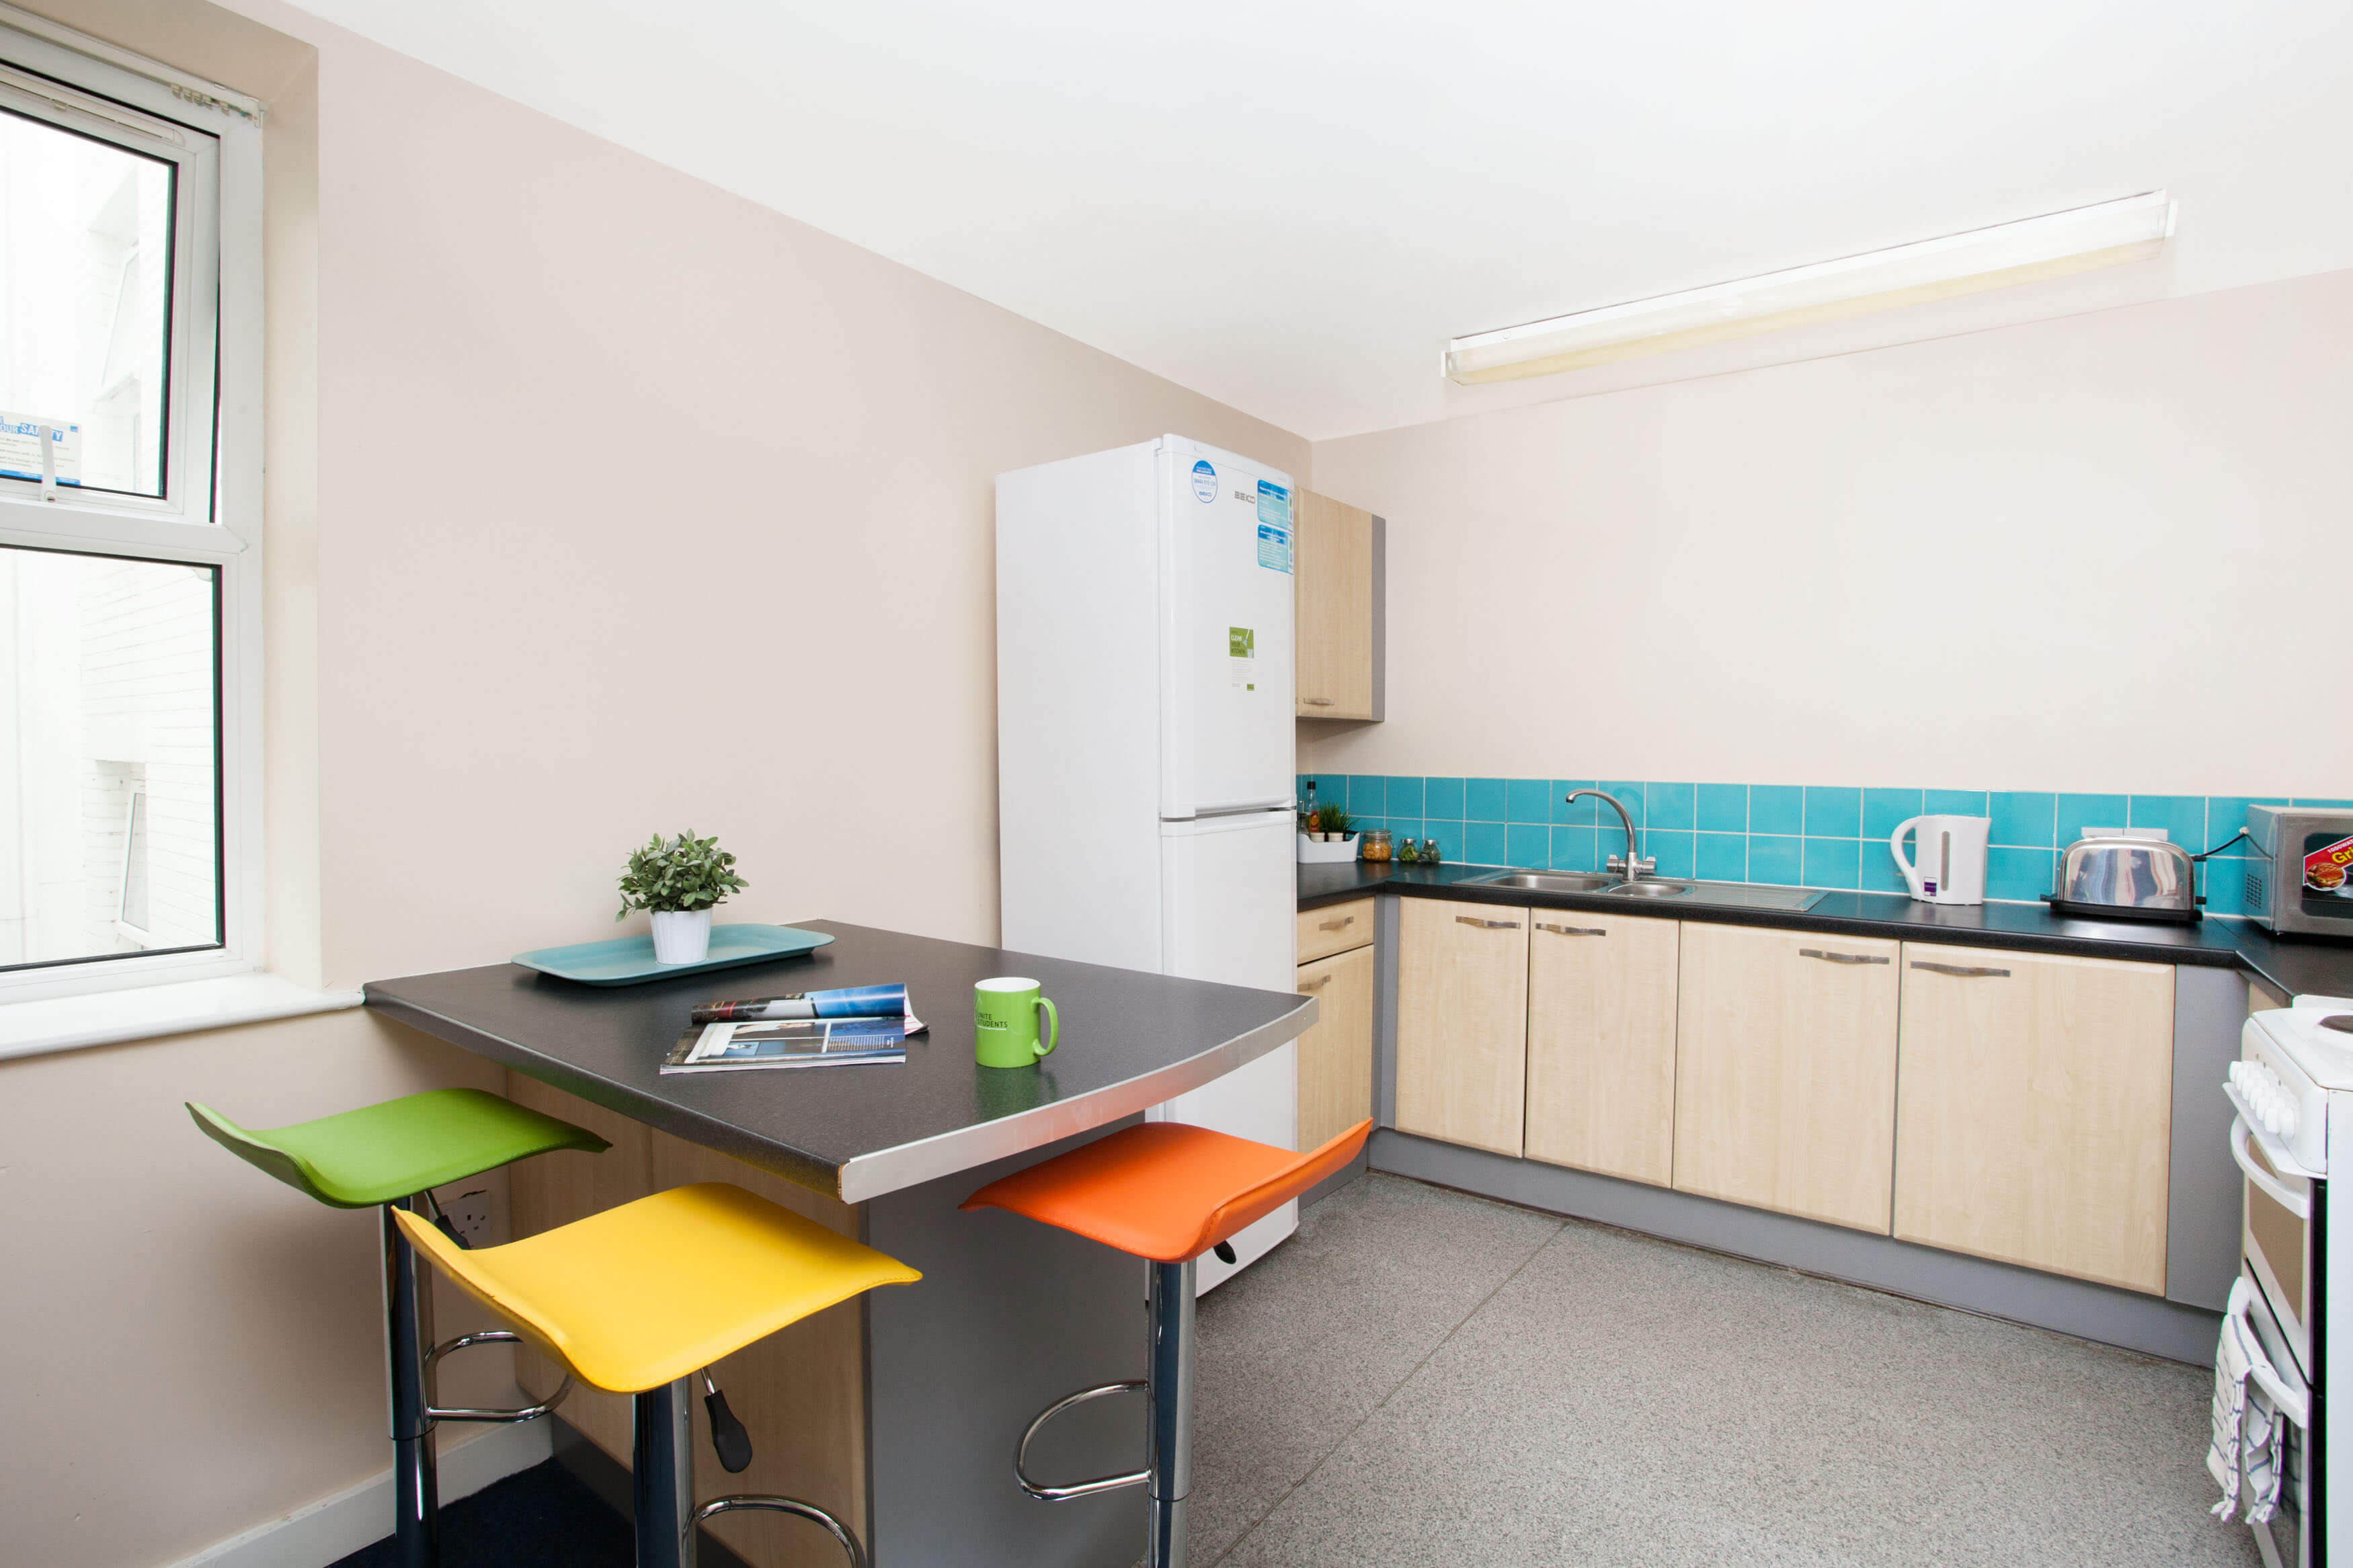 Student accommodation shared kitchen and breakfast bar for en-suite rooms in Liverpool